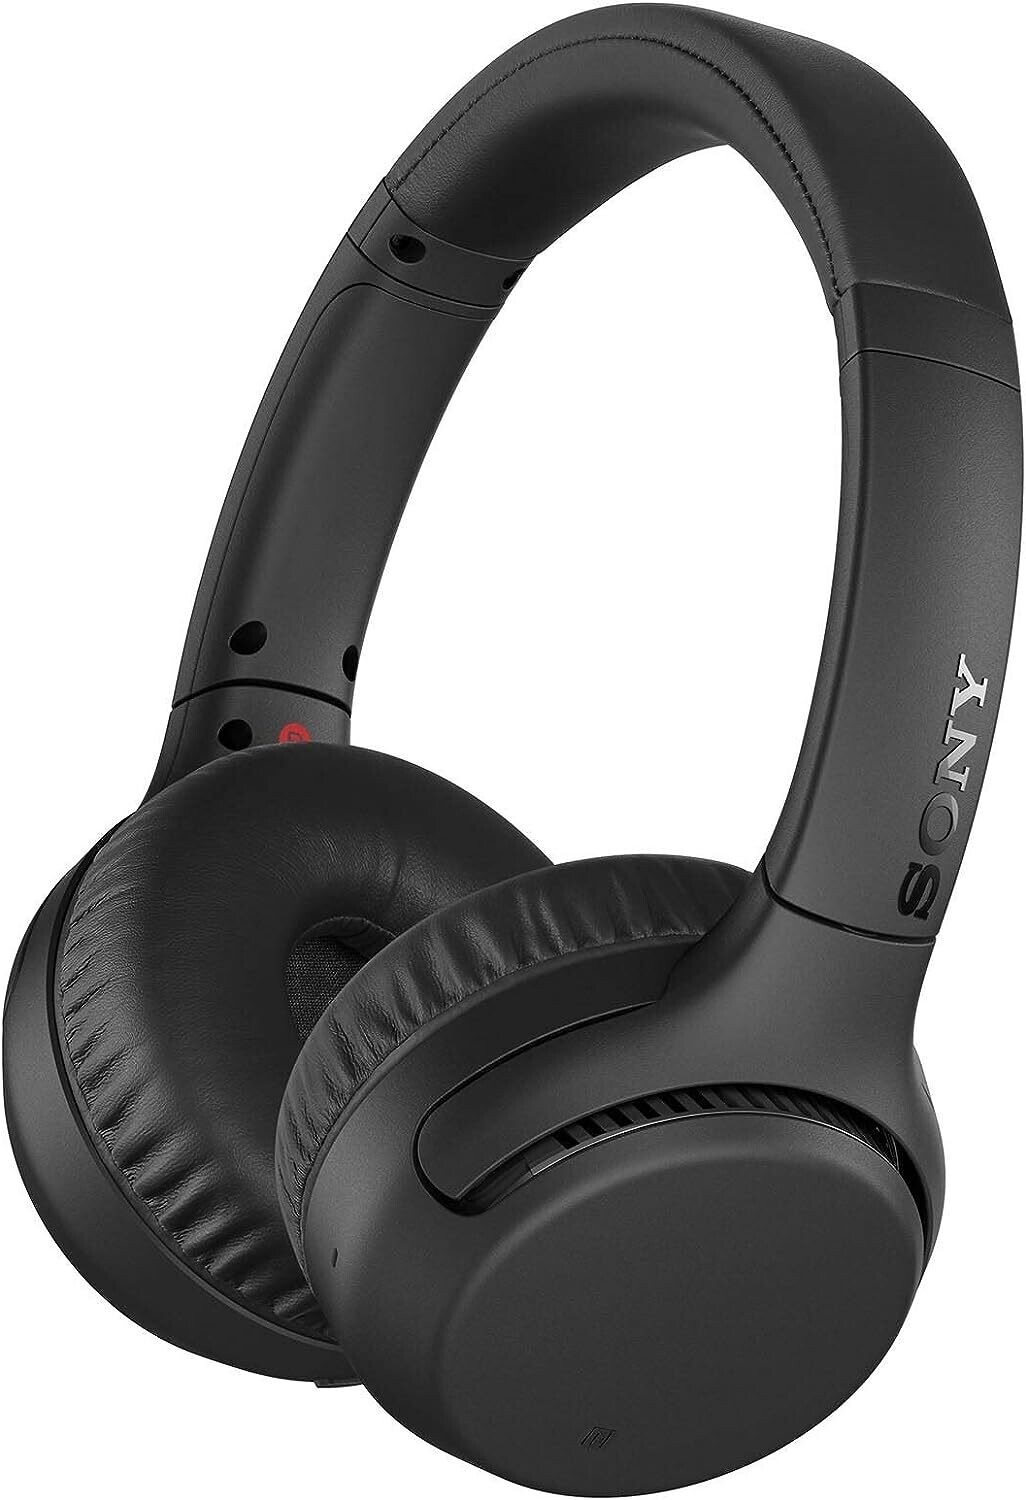 Sony WHXB700 Wireless Extra Bass Bluetooth Headset/Headphones with mic for Phone Call and Alexa Voice Control, Black